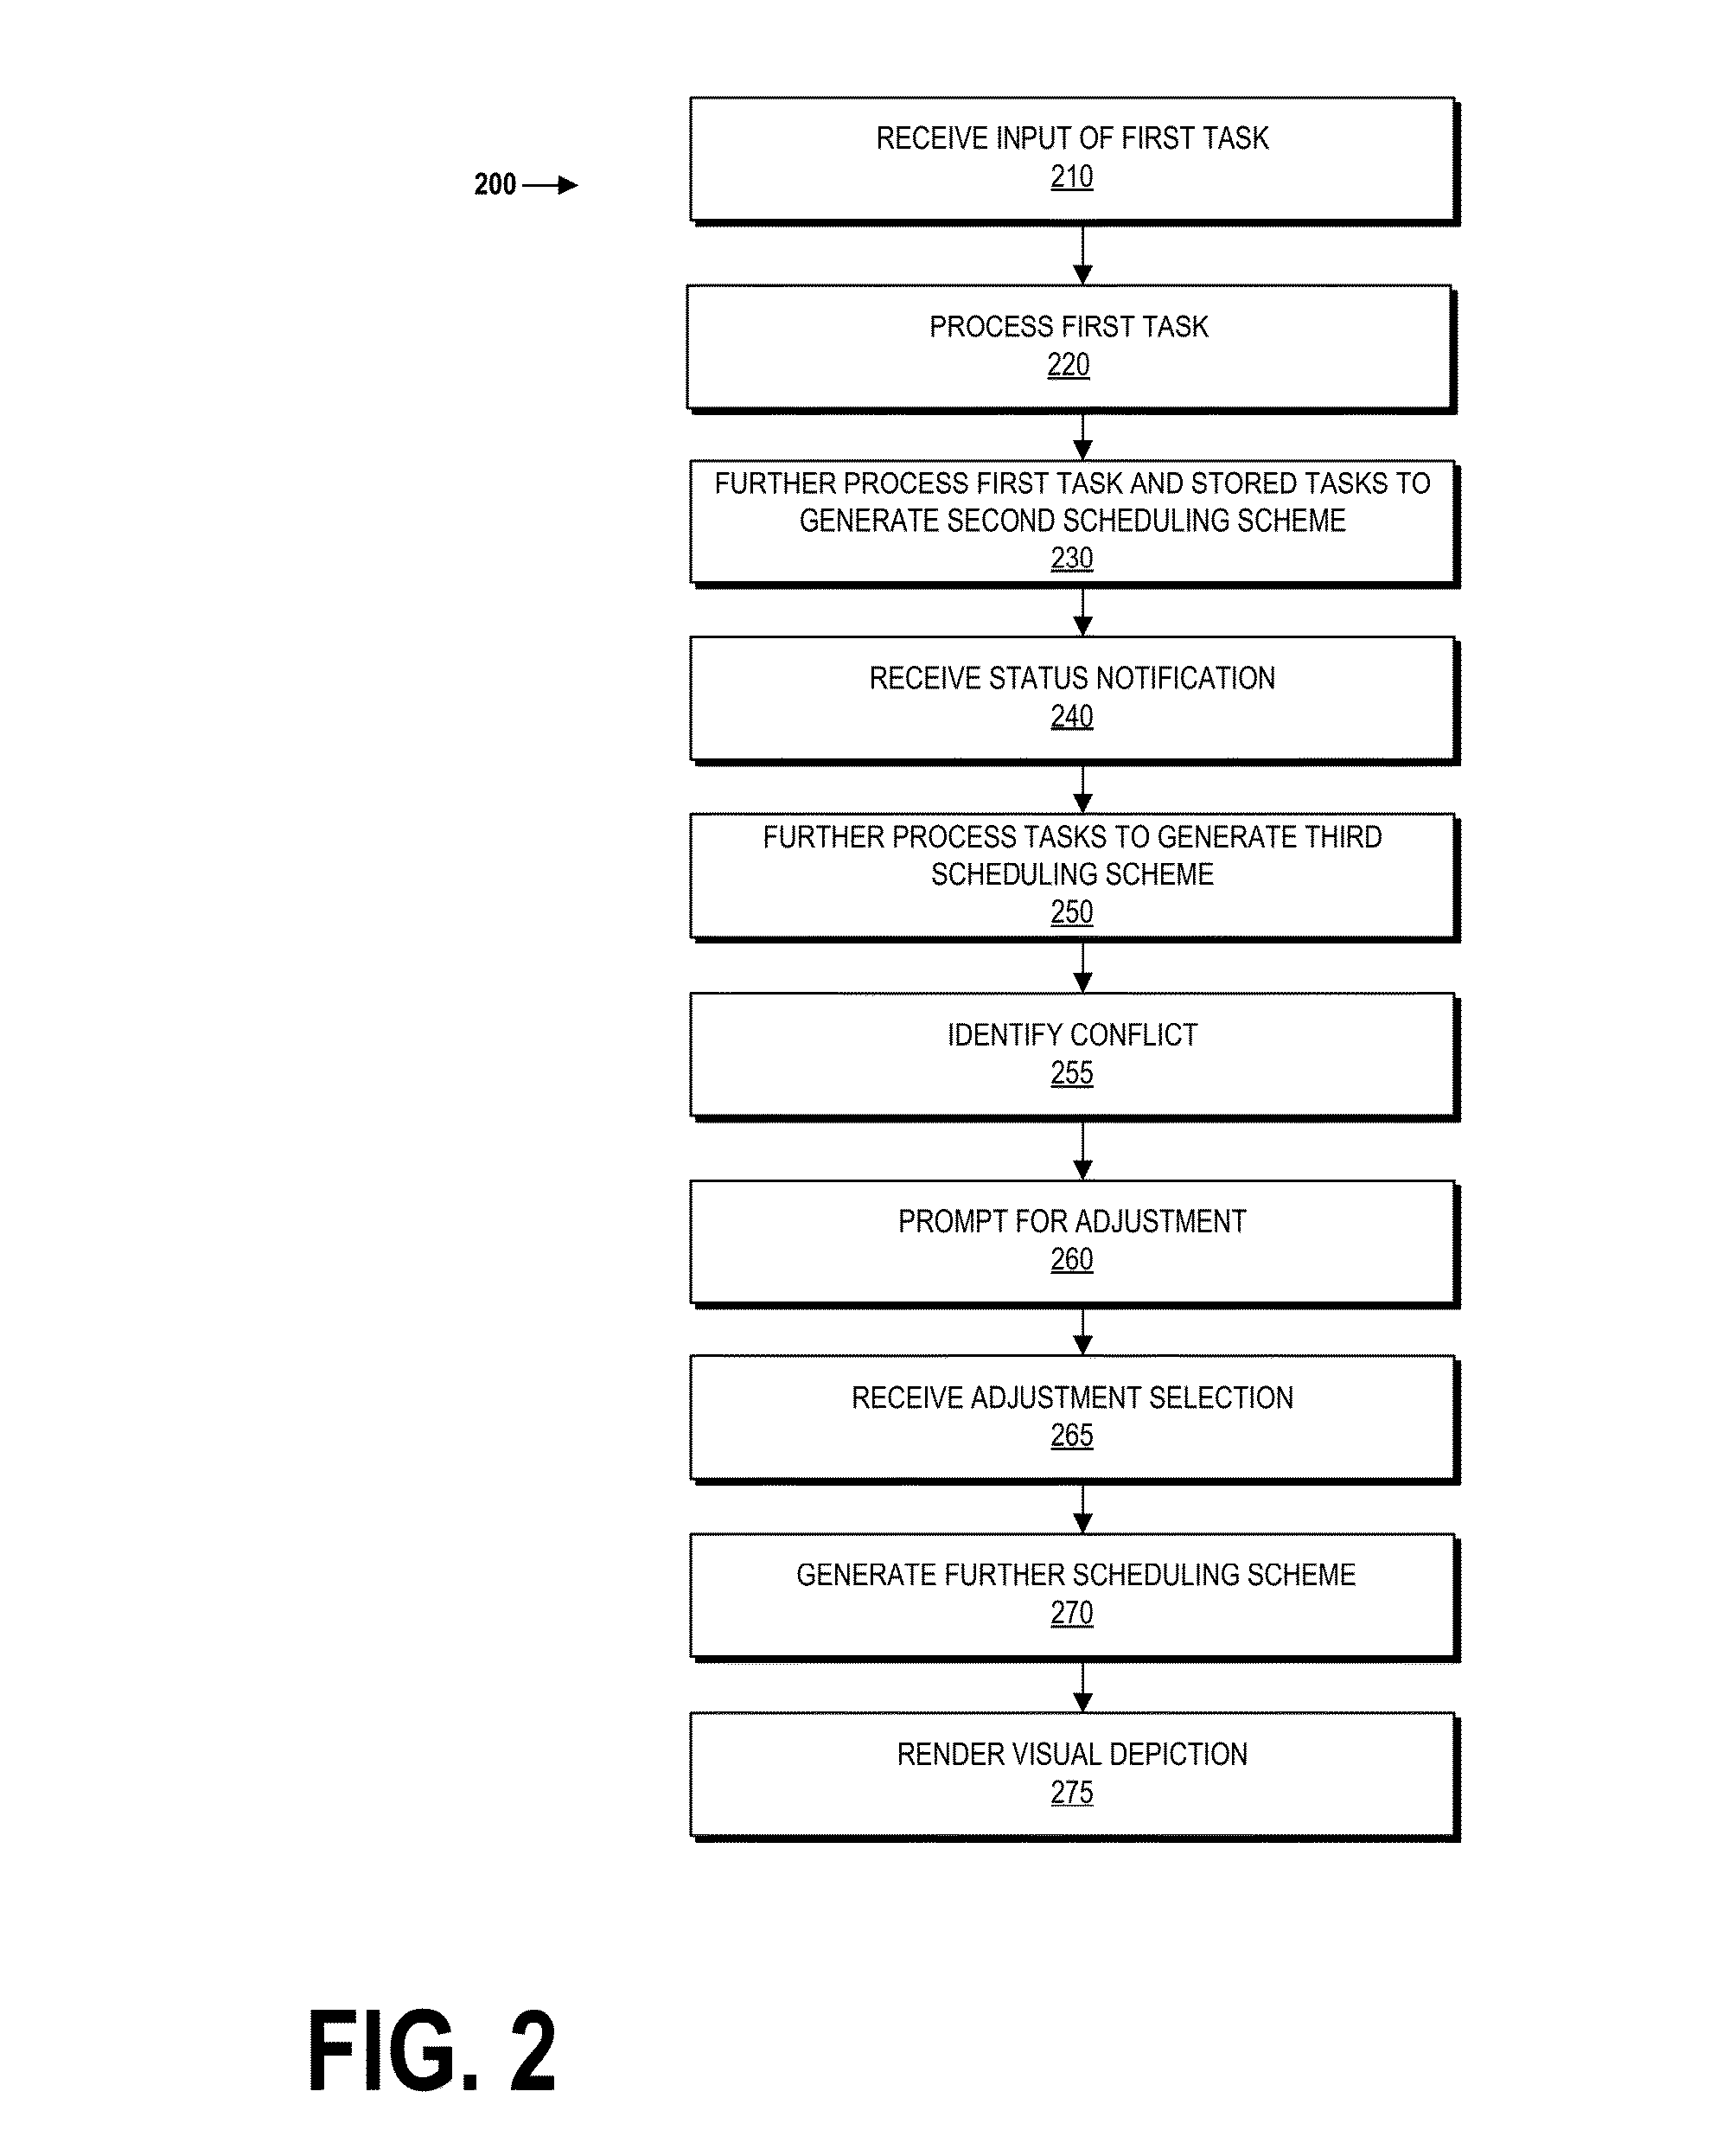 System and method for dynamically coordinating tasks, schedule planning, and workload management